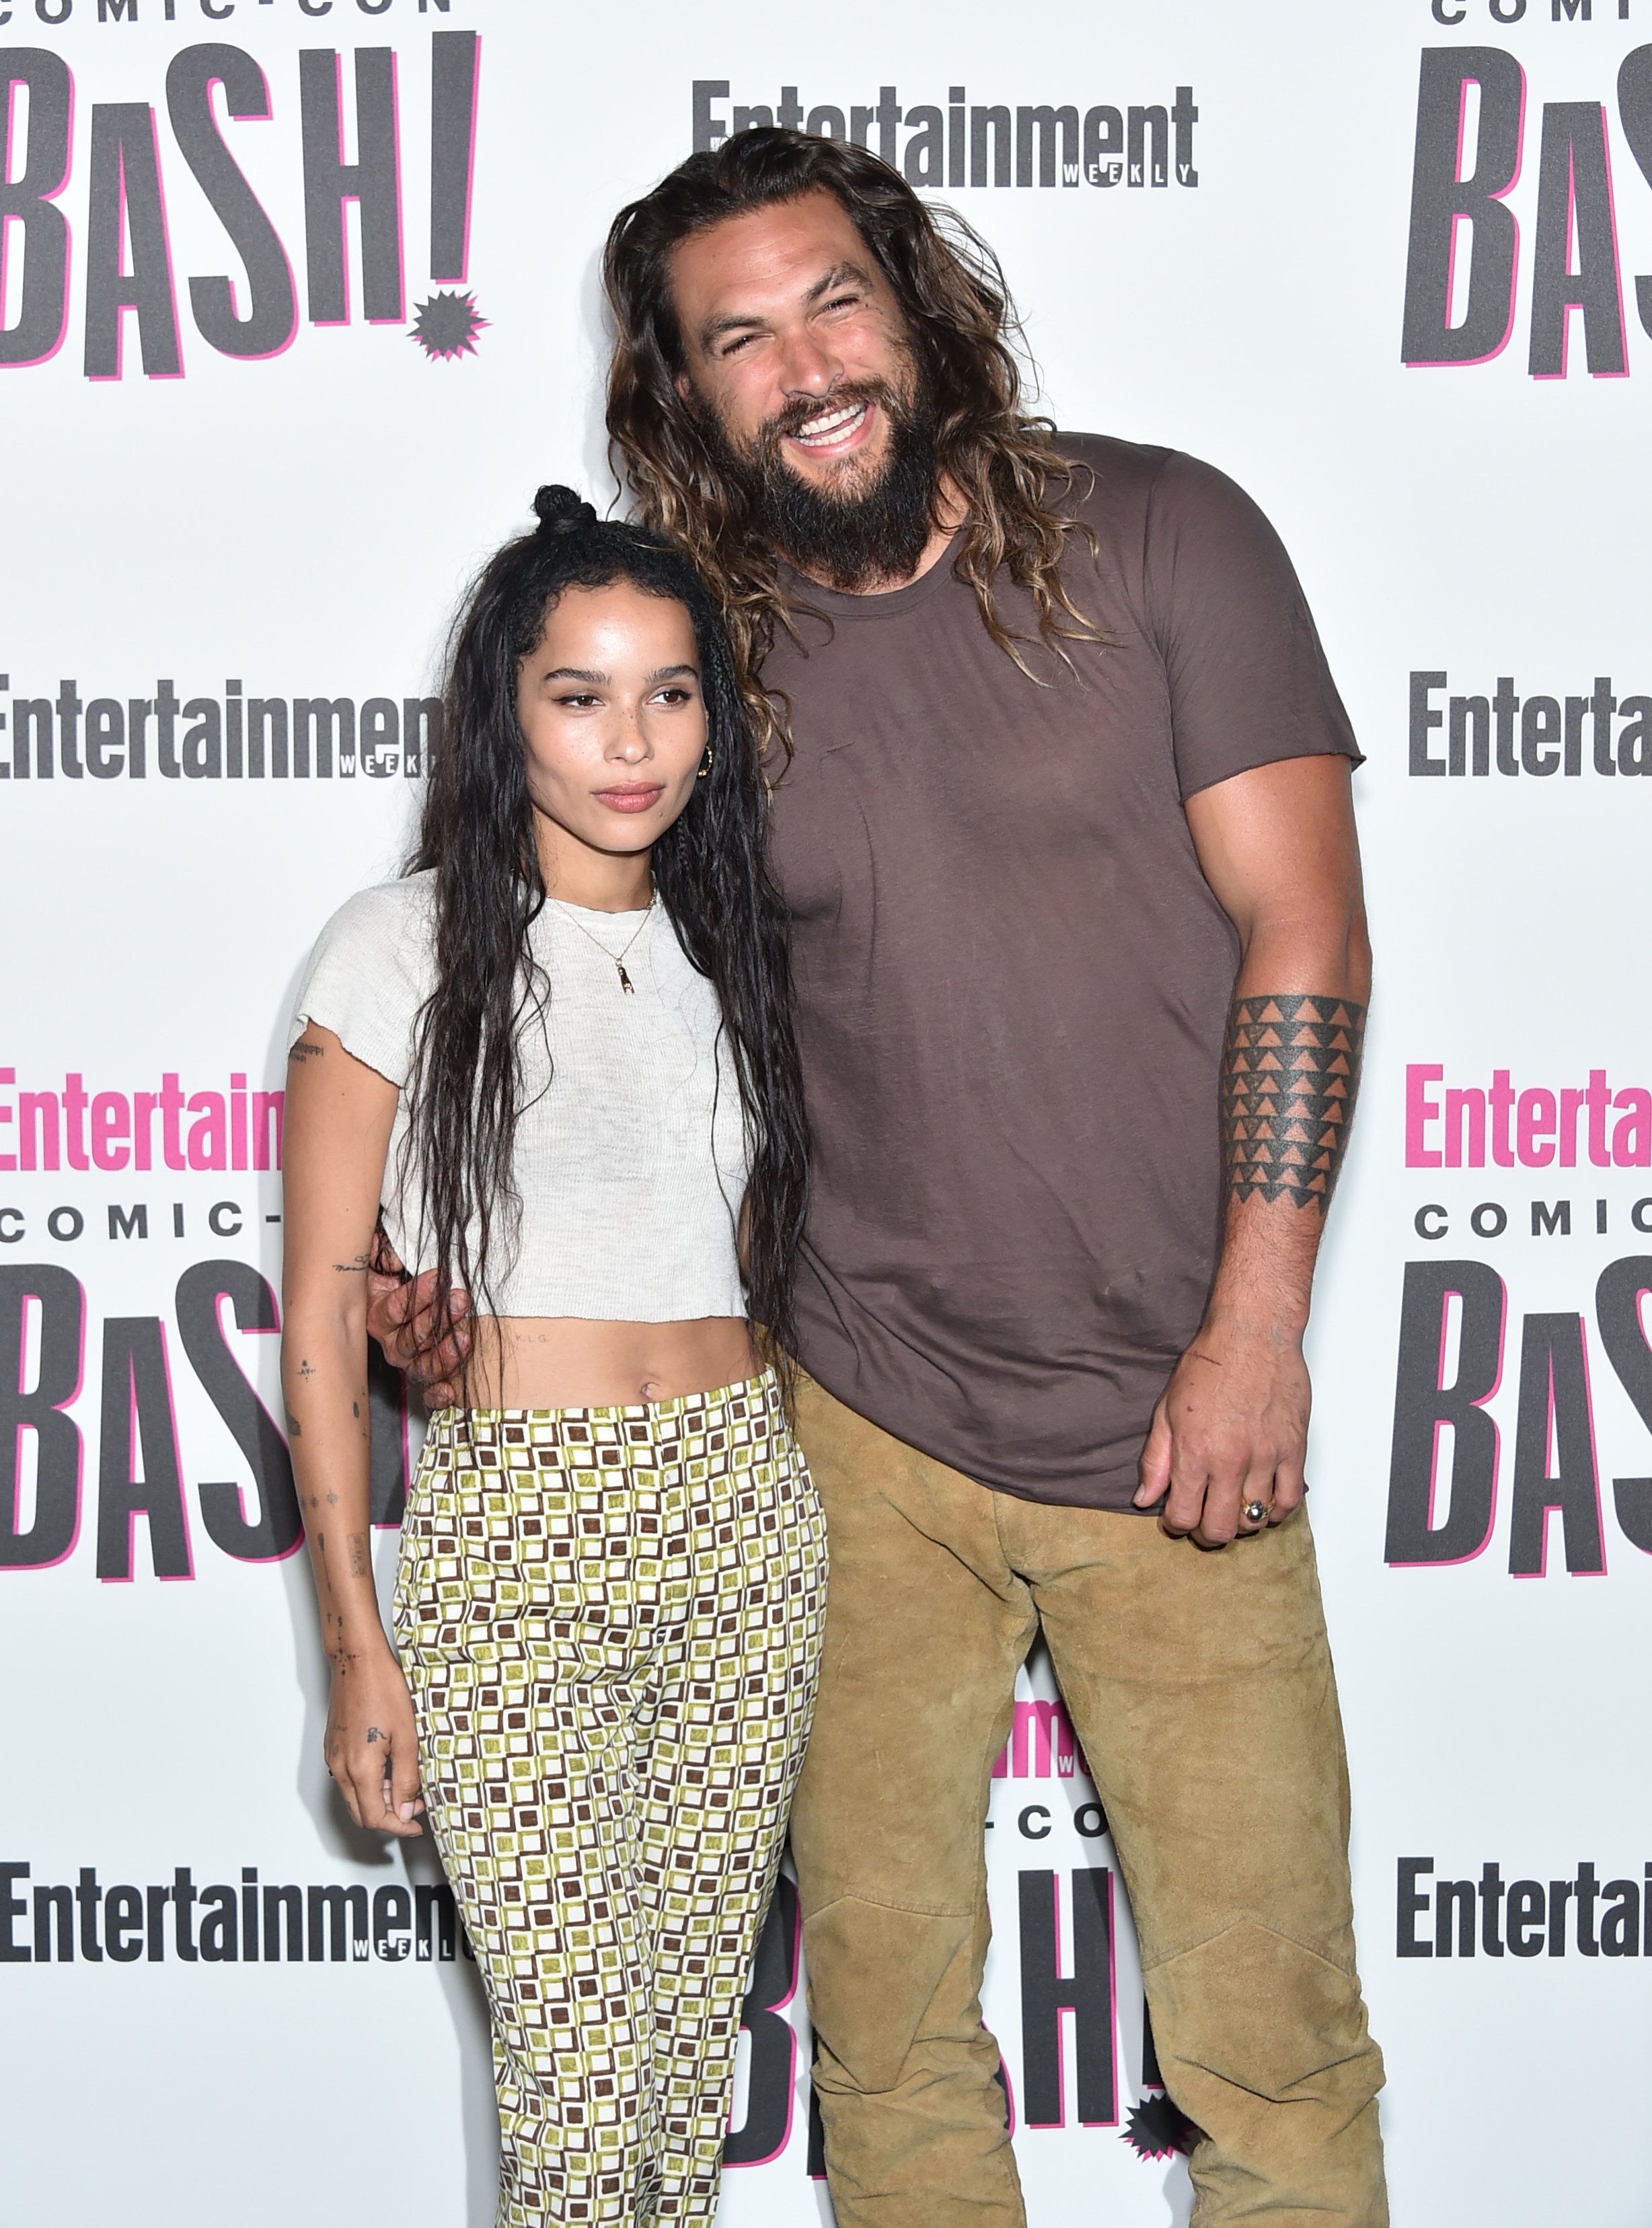 Zoe Kravitz and Jason Momoa attends Entertainment Weekly's Comic-Con Bash | Photo: Getty Images